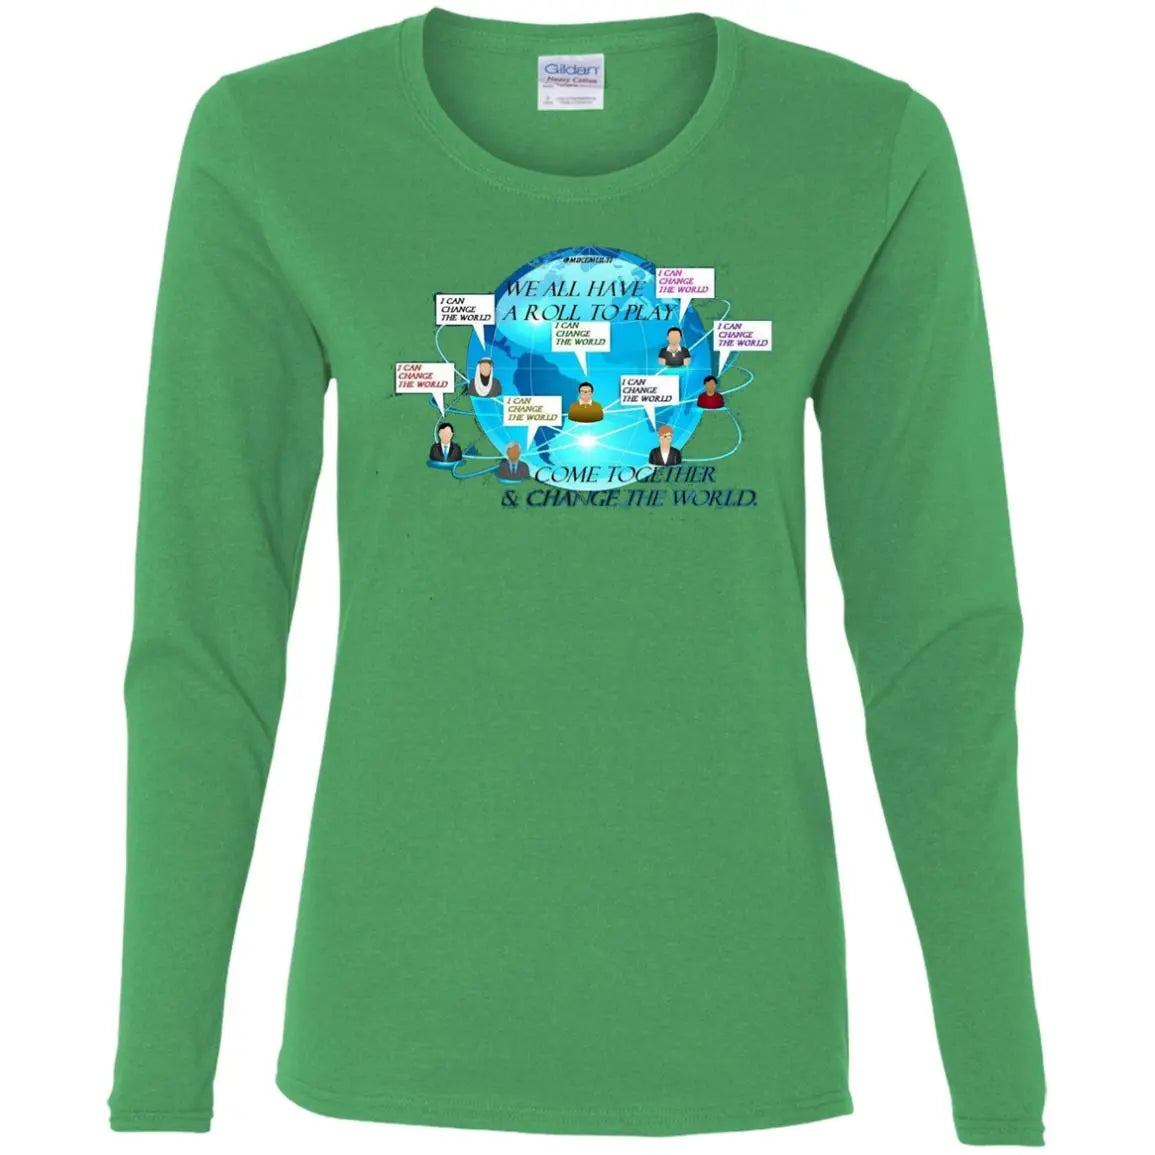 Come Together & Change The World - Ladies' Cotton LS T-Shirt CustomCat